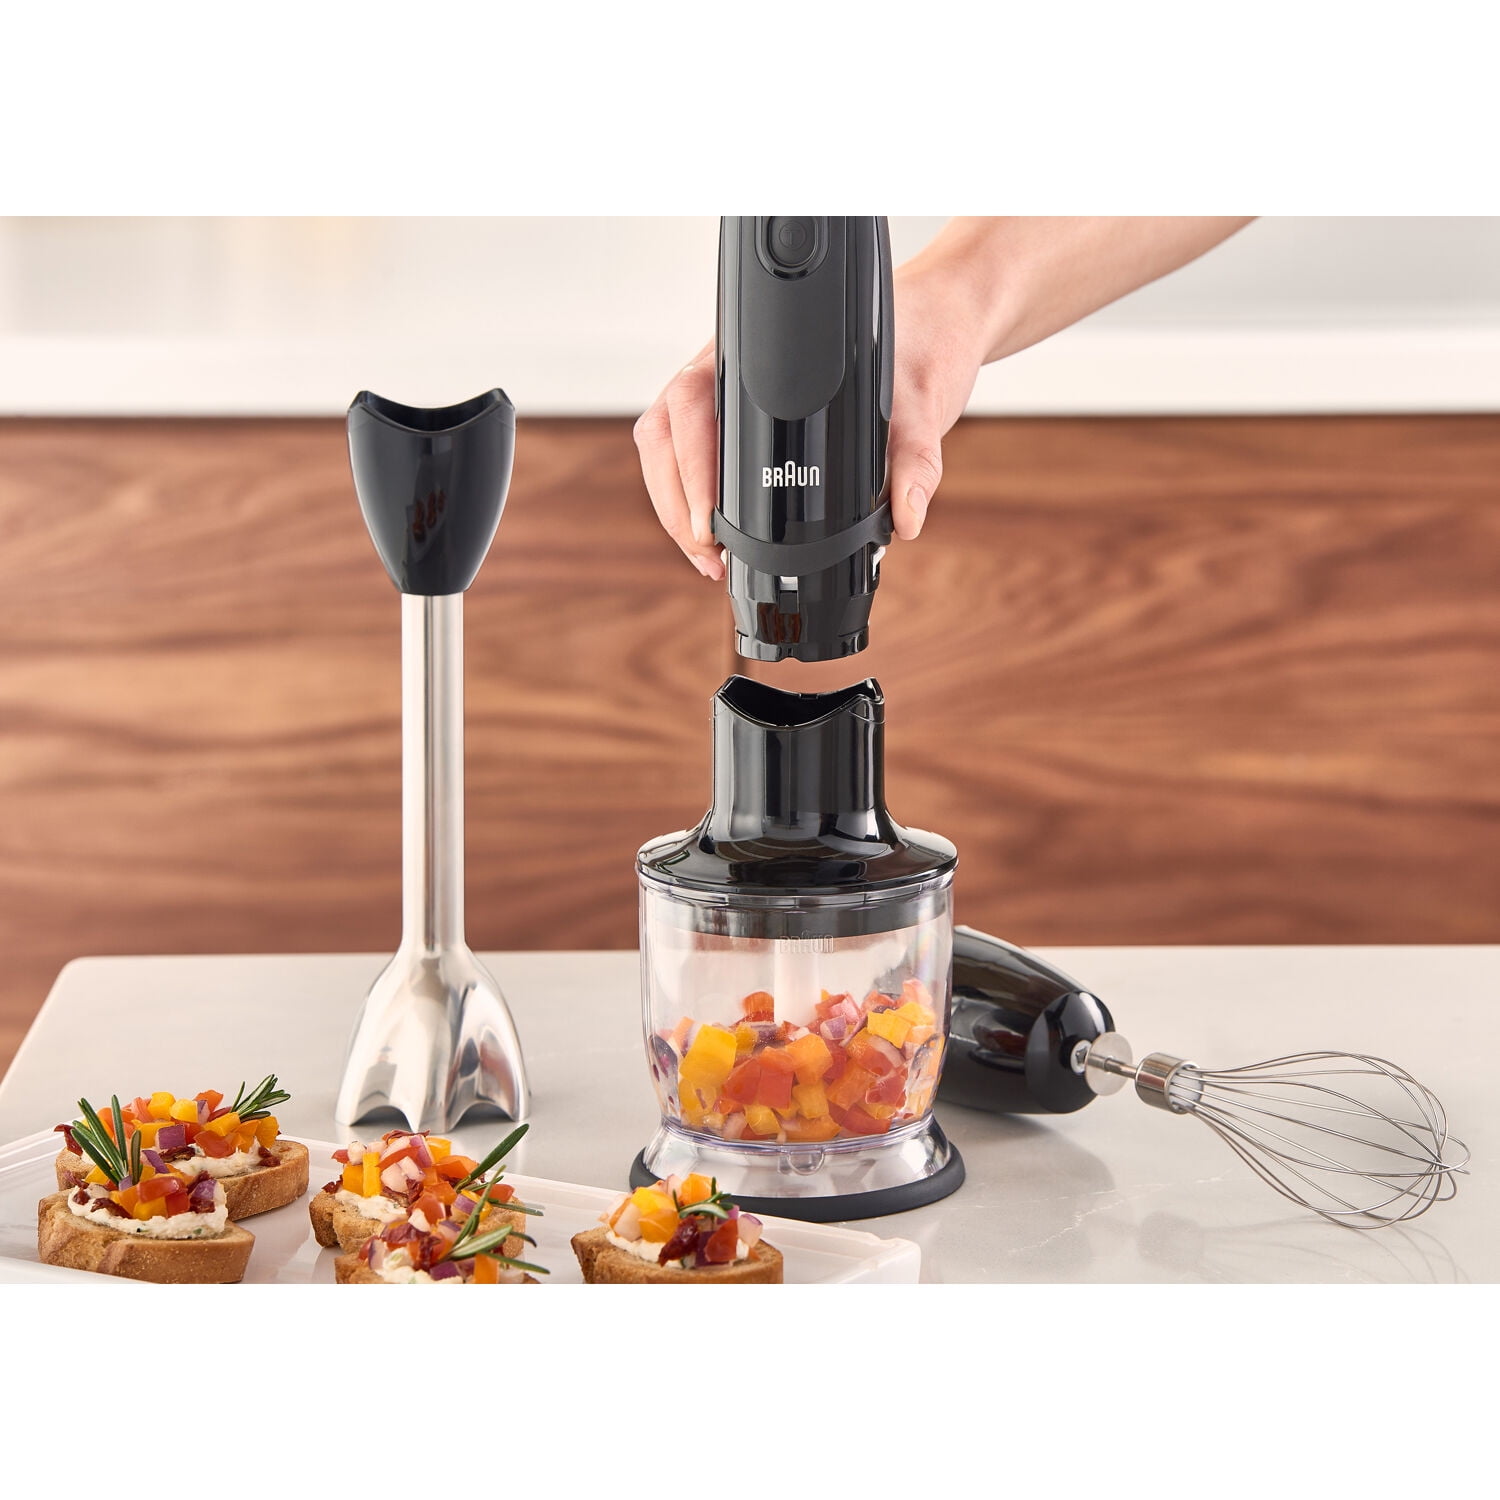 Braun MultiQuick 9 Immersion Hand Blender Set For Just $44.95-$64.95  Shipped From HSN After $105 Price Drop! 